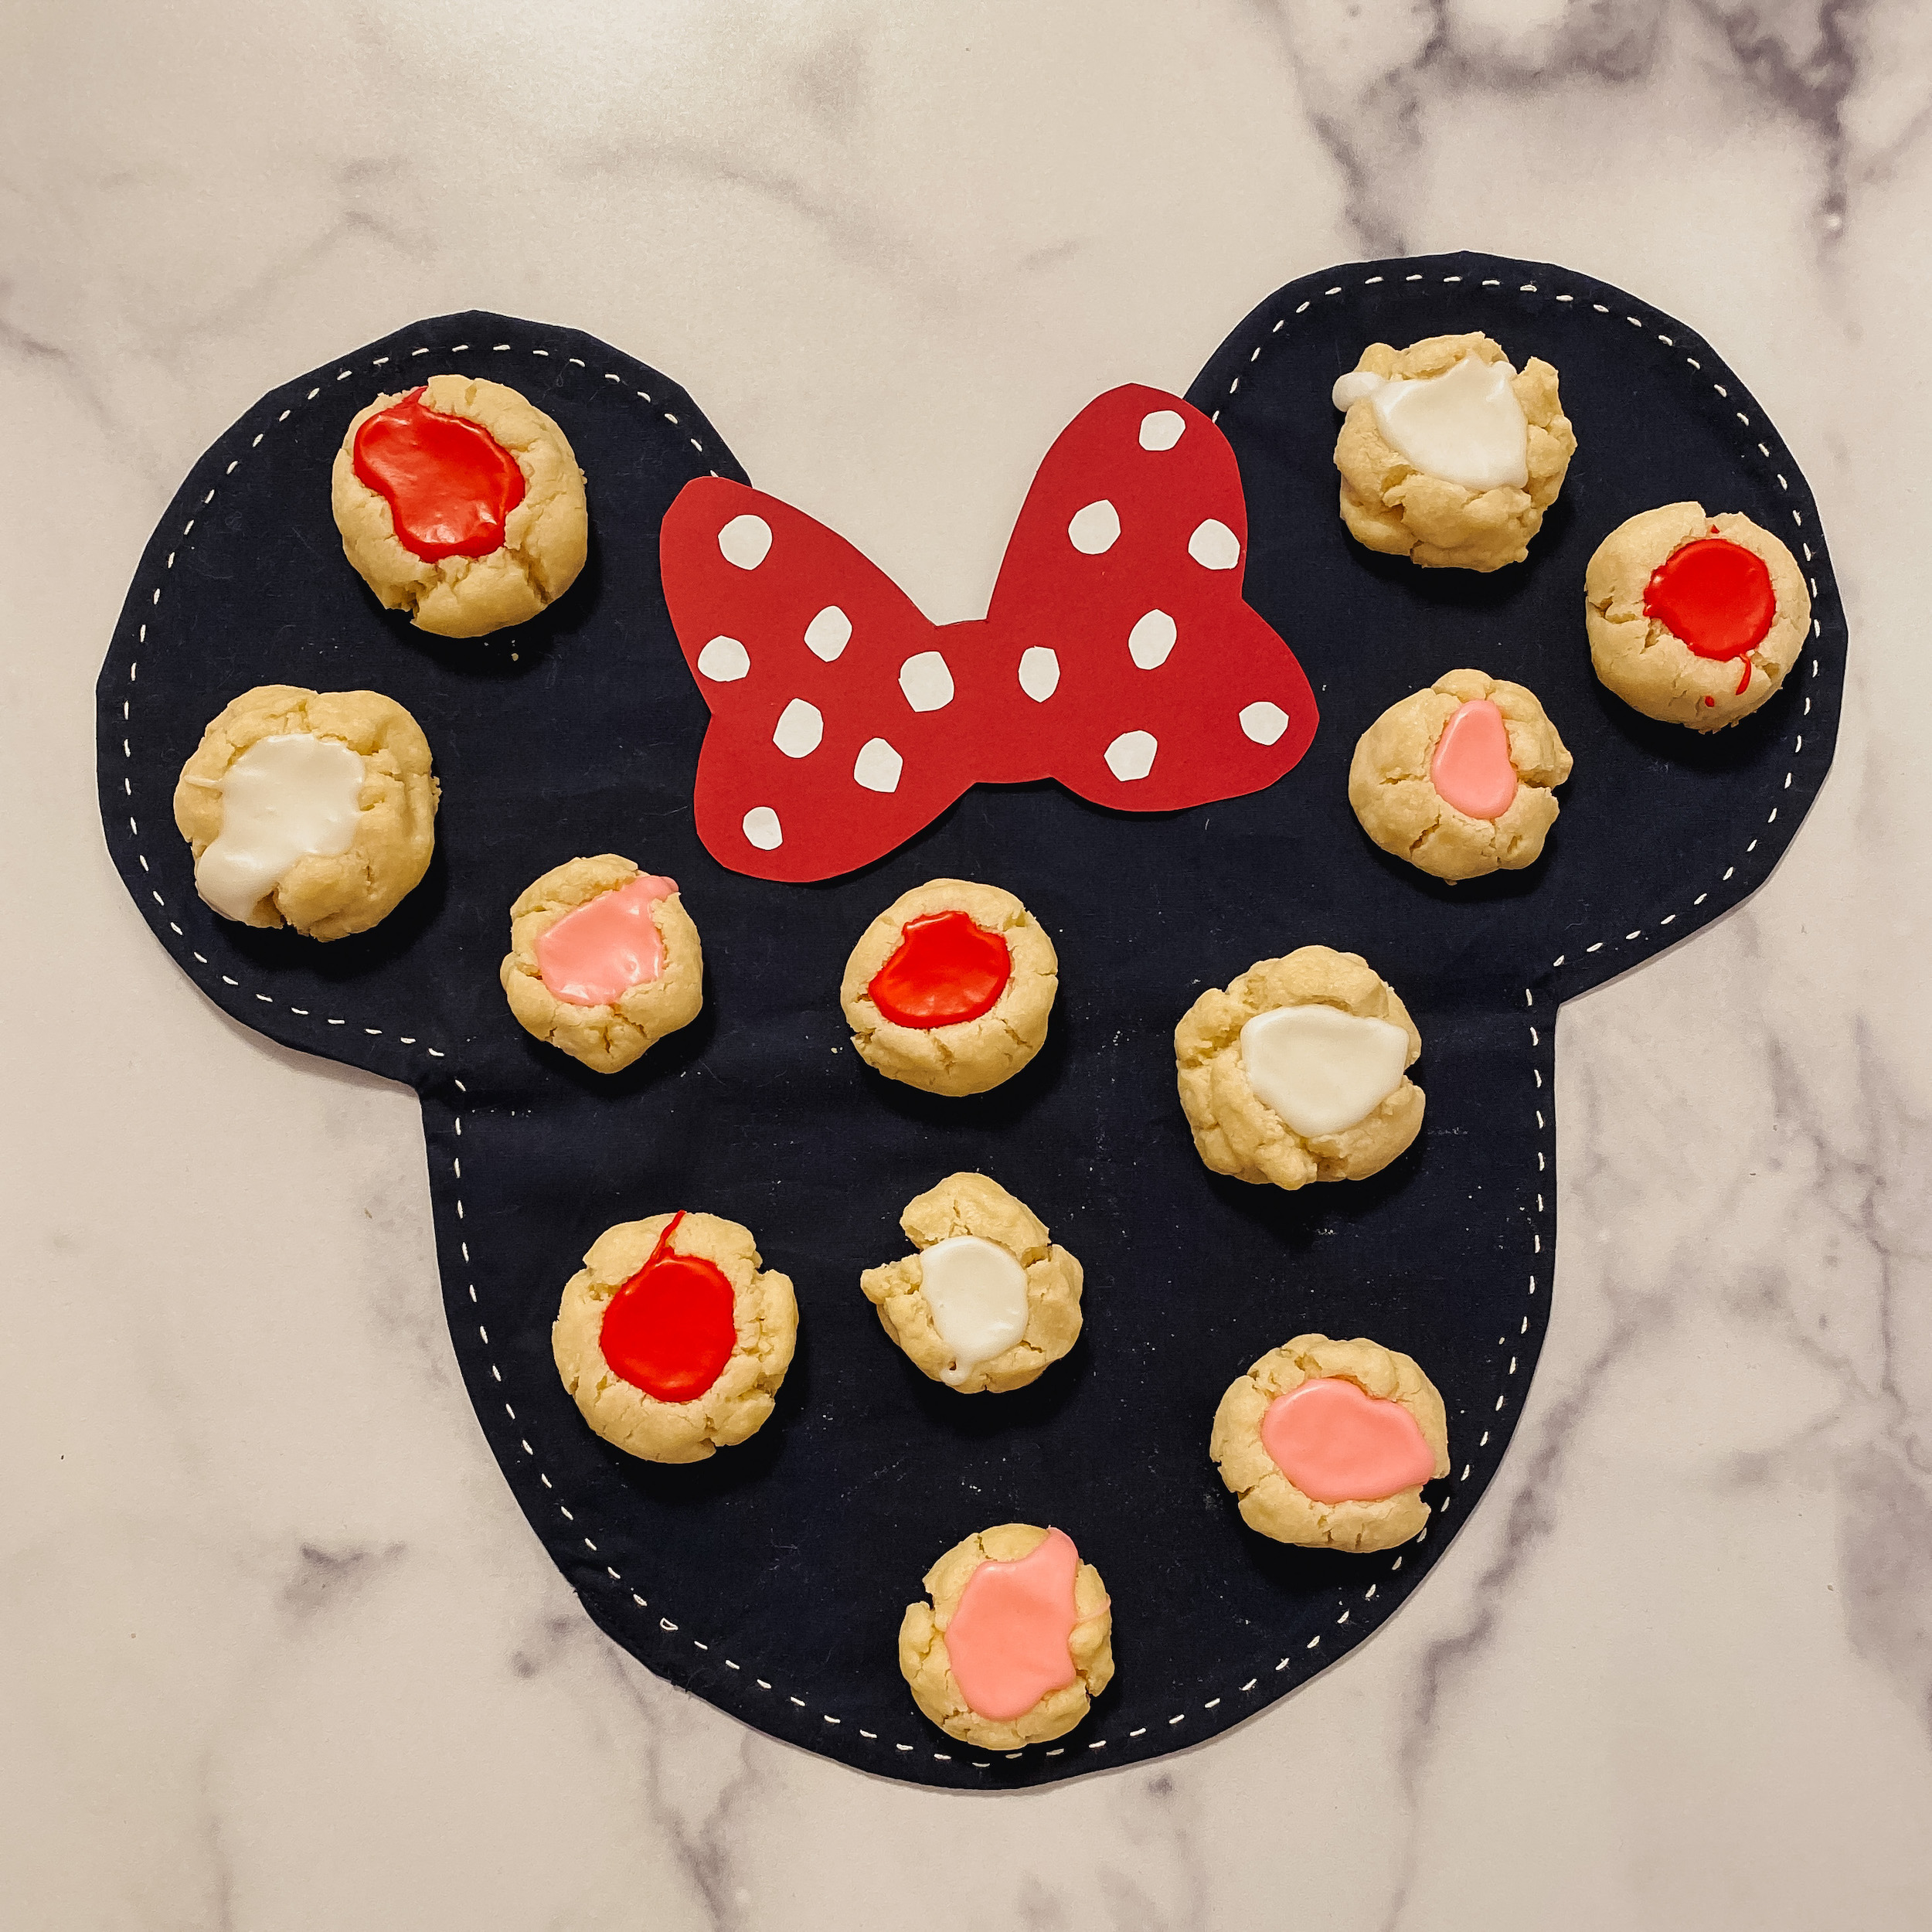 minnie's polka dot cookies. shortbread cookies with red, white, and pink icing